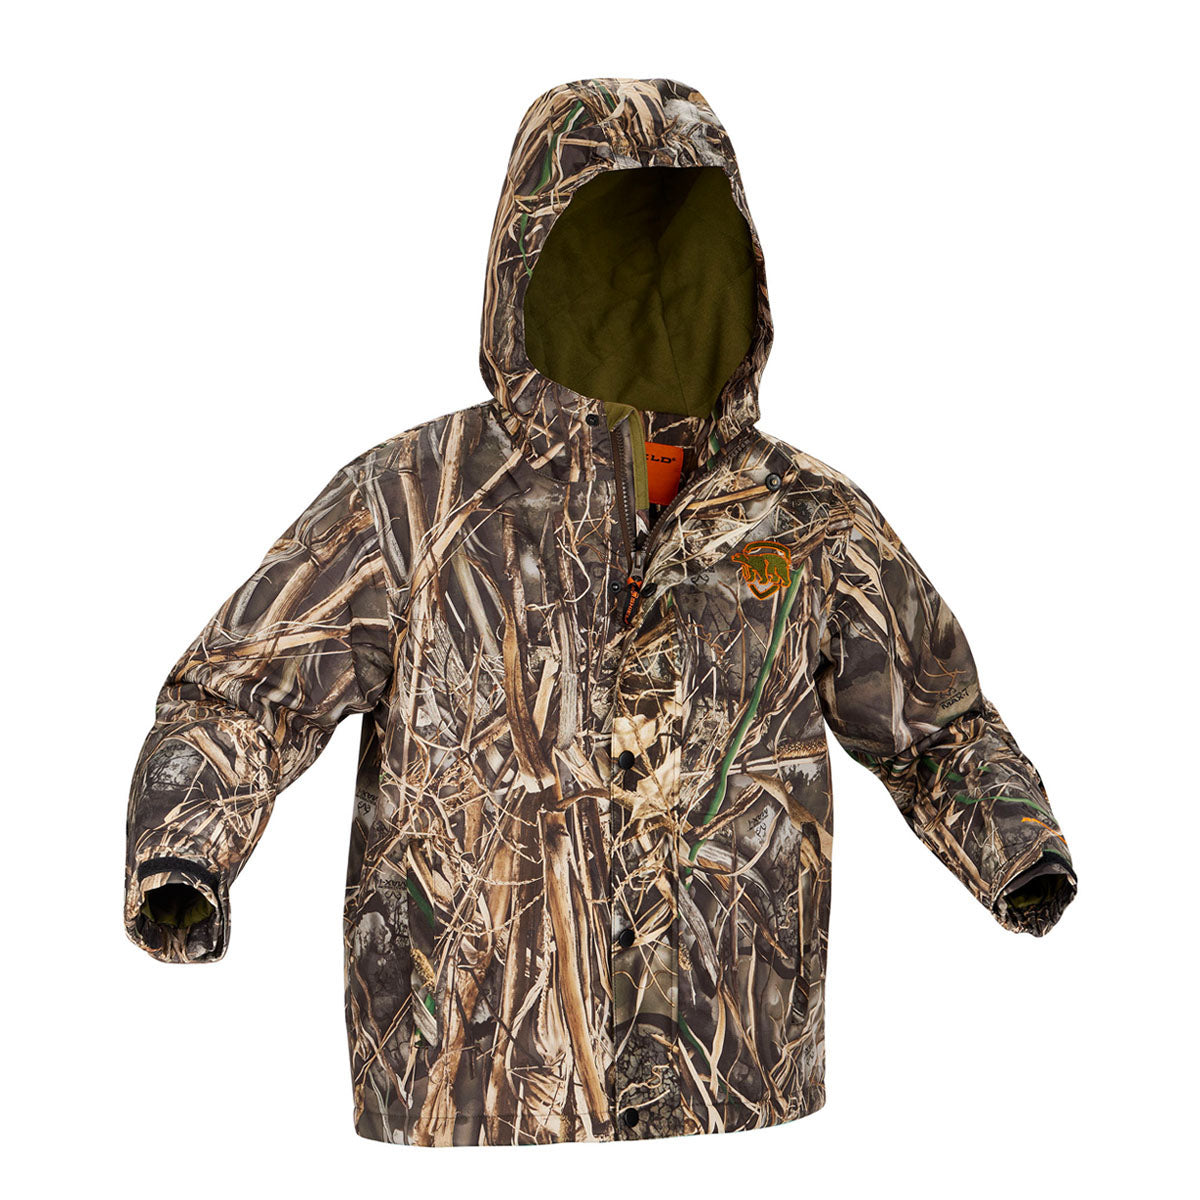 Hunting Jackets | Hunting Parkas for Sale – ArcticShield